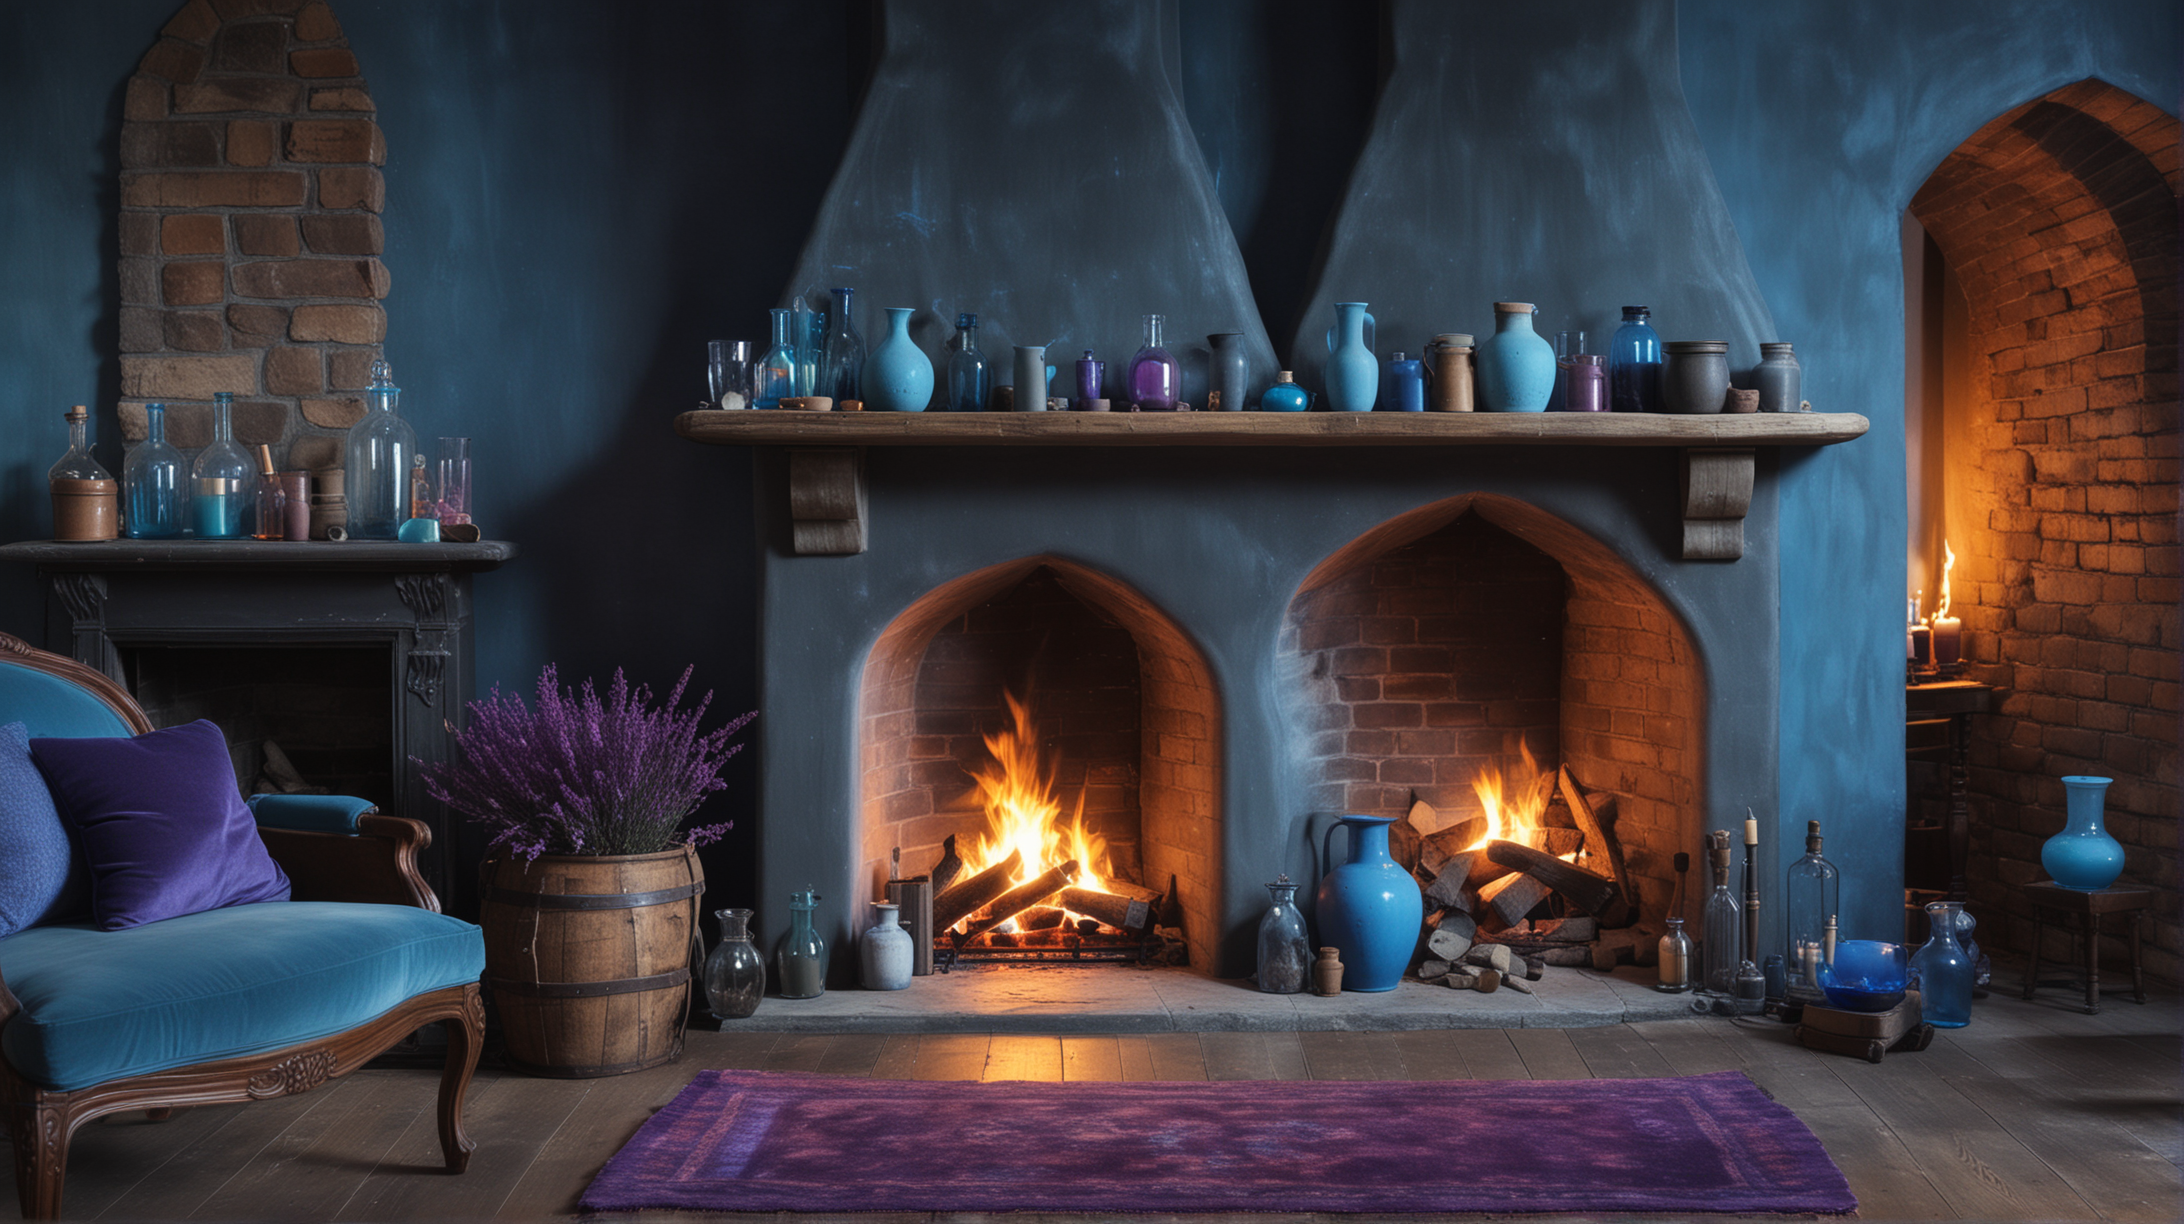 Magical Fairytale room with bright blue and purle. Blue-flames inside empty-fireplace and potions